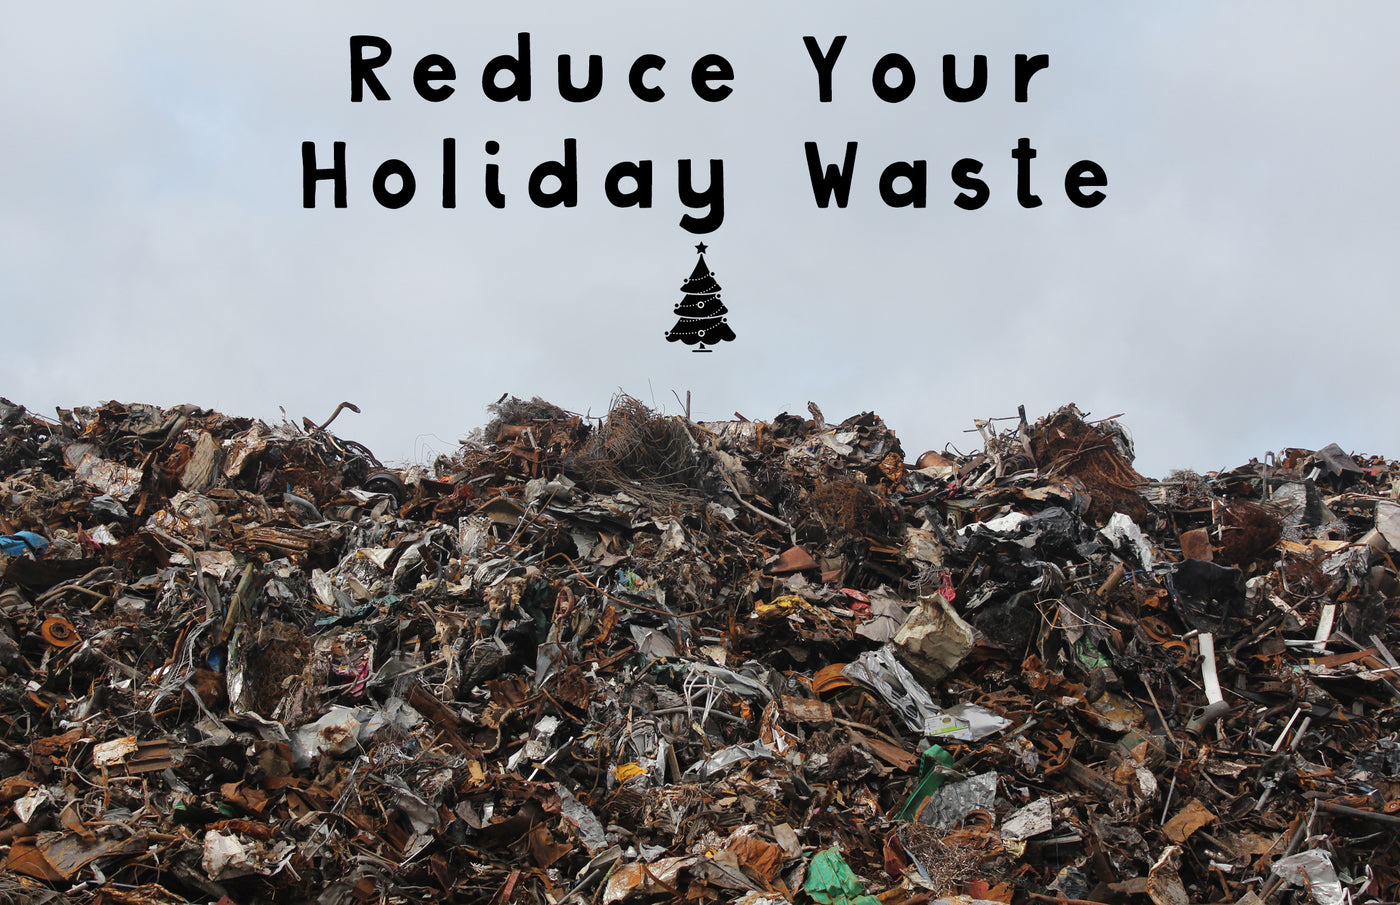 Three ways to reduce your holiday waste